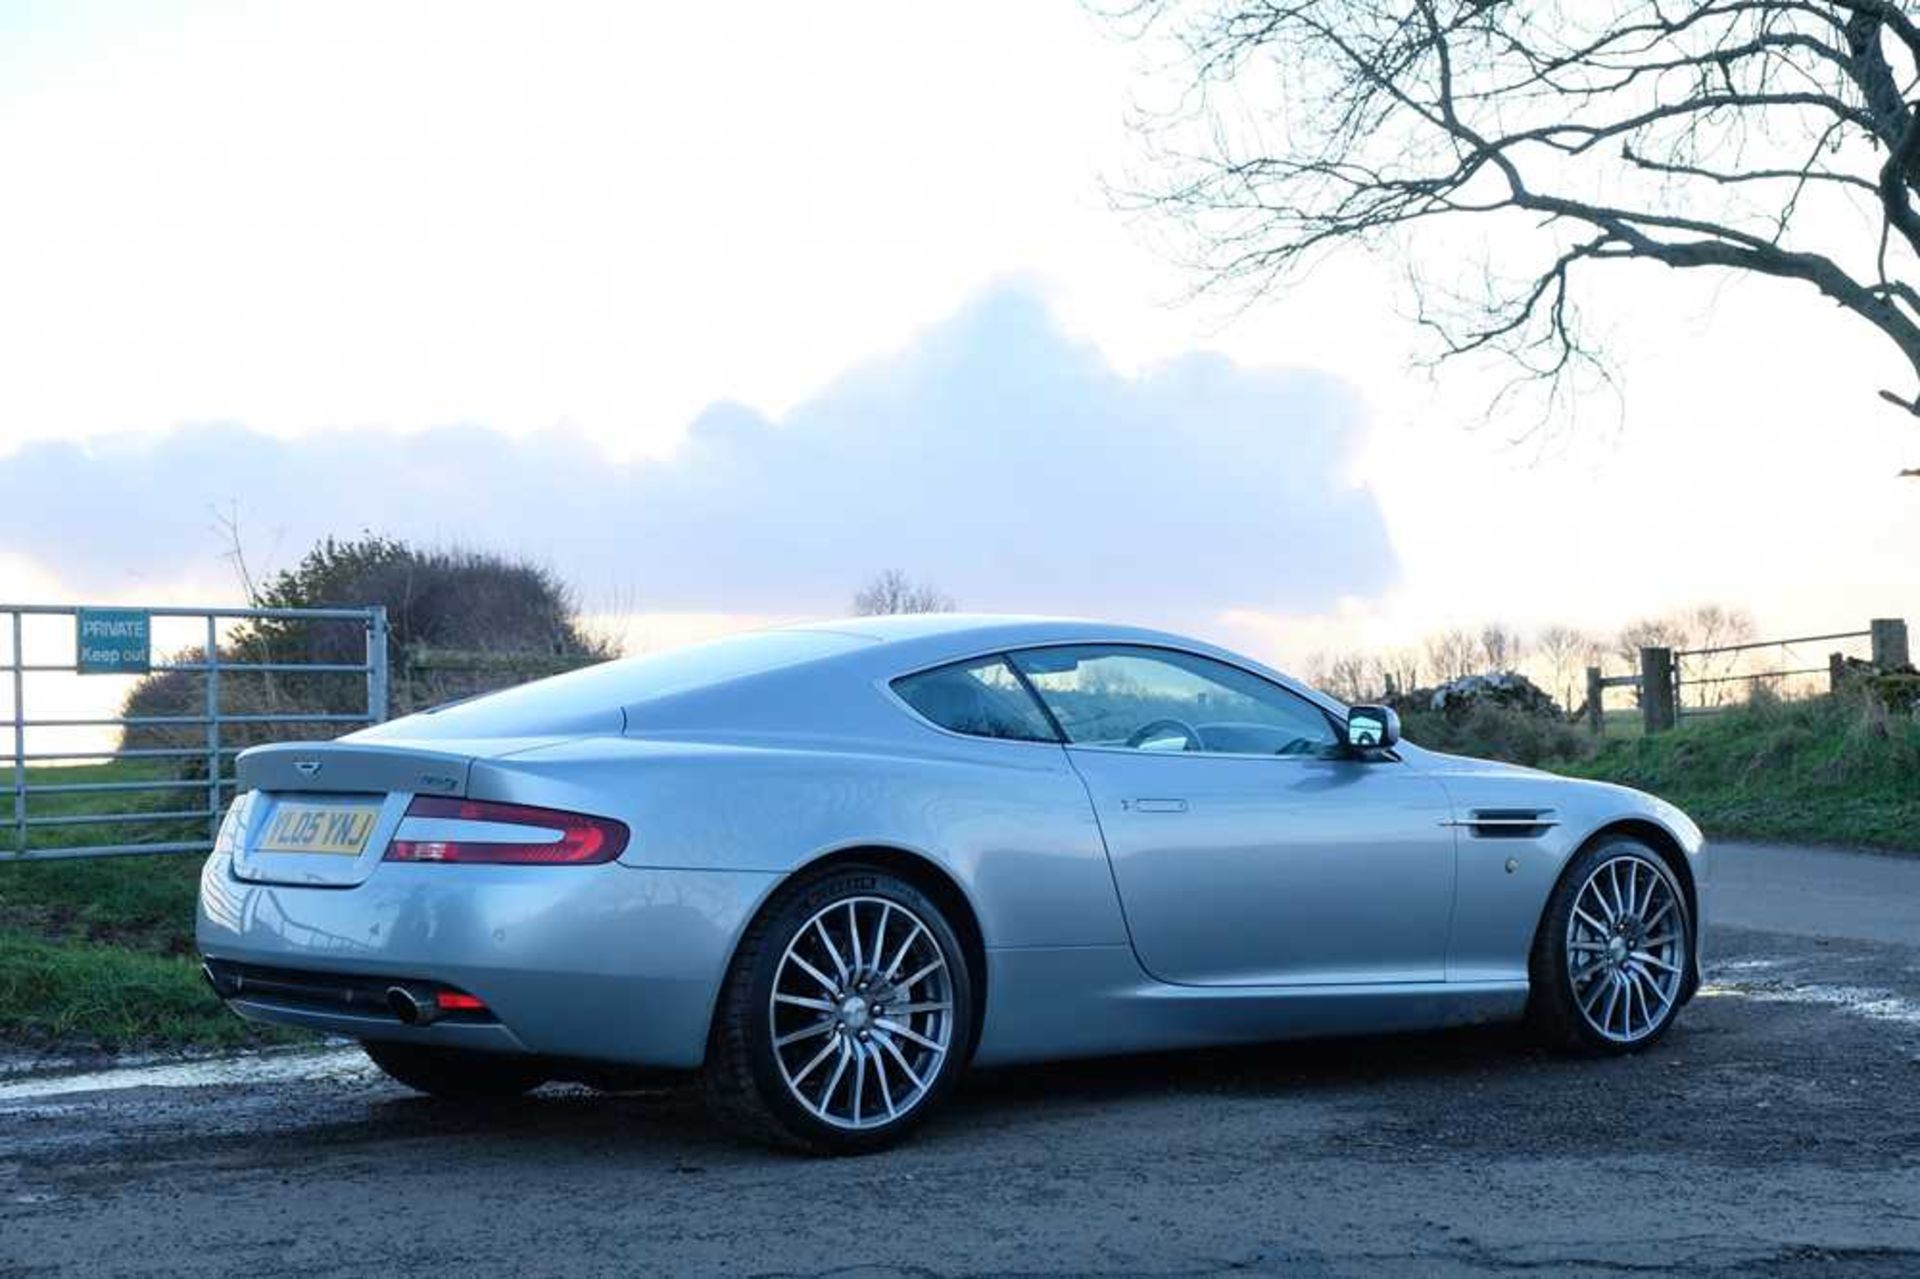 2005 Aston Martin DB9 c.25,000 from new and 4 former keepers - Image 26 of 59